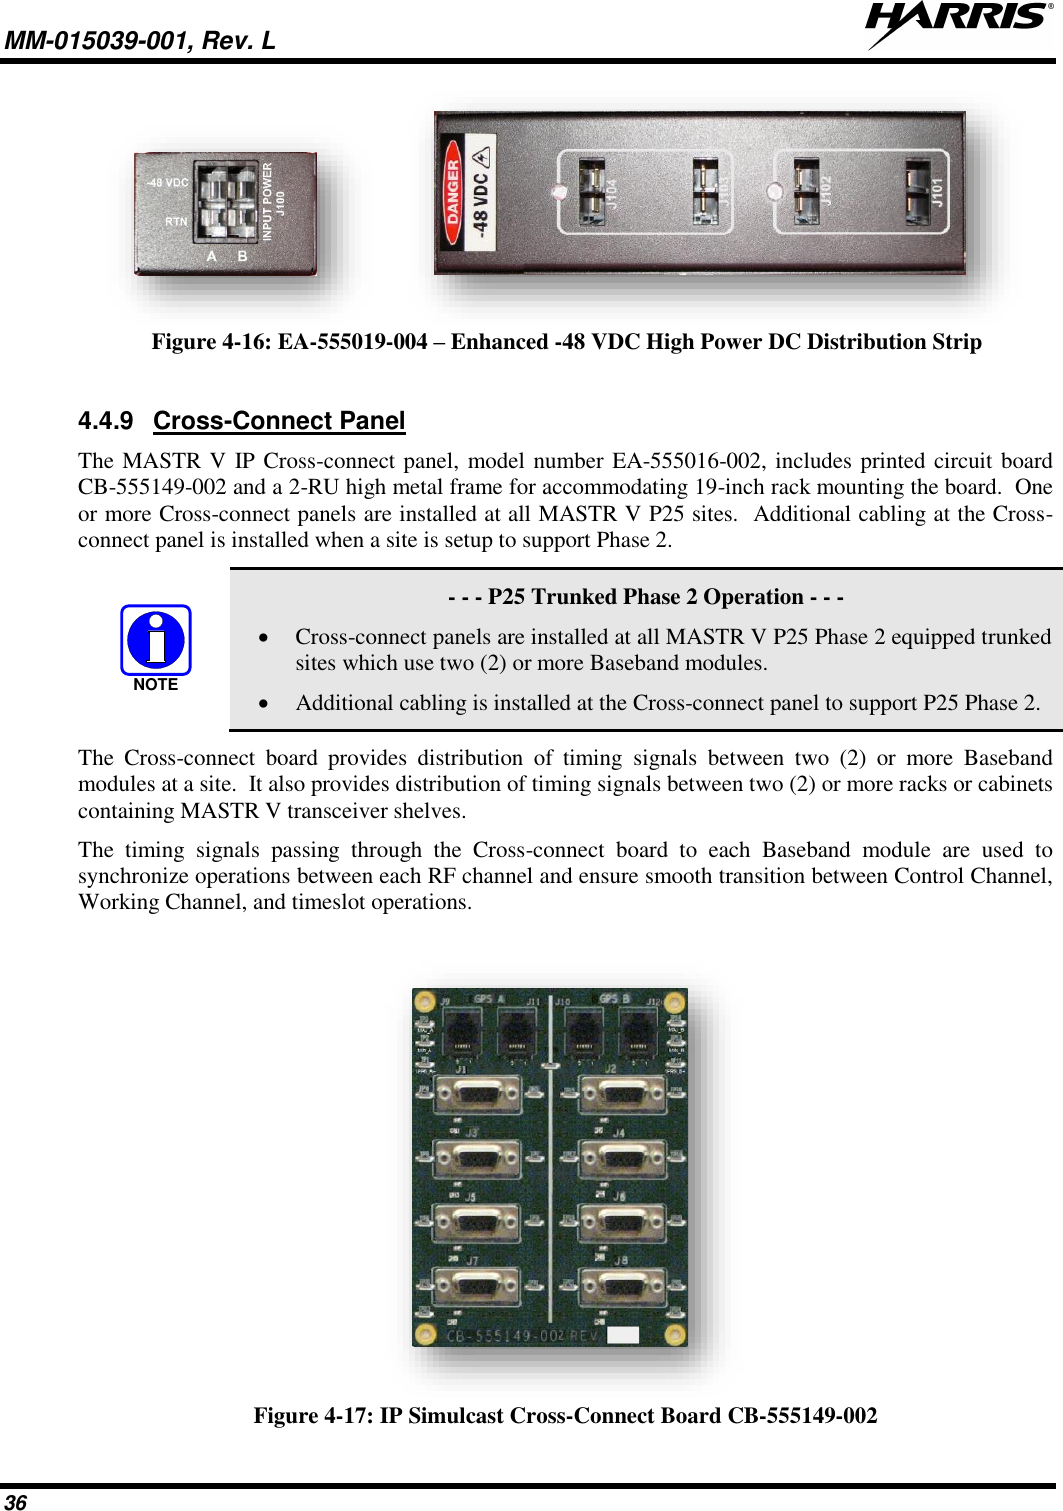 MM-015039-001, Rev. L     36    Figure 4-16: EA-555019-004 – Enhanced -48 VDC High Power DC Distribution Strip  4.4.9  Cross-Connect Panel The MASTR V IP Cross-connect panel, model number EA-555016-002, includes printed circuit board CB-555149-002 and a 2-RU high metal frame for accommodating 19-inch rack mounting the board.  One or more Cross-connect panels are installed at all MASTR V P25 sites.  Additional cabling at the Cross-connect panel is installed when a site is setup to support Phase 2.     - - - P25 Trunked Phase 2 Operation - - - • Cross-connect panels are installed at all MASTR V P25 Phase 2 equipped trunked sites which use two (2) or more Baseband modules. • Additional cabling is installed at the Cross-connect panel to support P25 Phase 2. The  Cross-connect  board  provides  distribution  of  timing  signals  between  two  (2)  or  more  Baseband modules at a site.  It also provides distribution of timing signals between two (2) or more racks or cabinets containing MASTR V transceiver shelves.   The  timing  signals  passing  through  the  Cross-connect  board  to  each  Baseband  module  are  used  to synchronize operations between each RF channel and ensure smooth transition between Control Channel, Working Channel, and timeslot operations.   Figure 4-17: IP Simulcast Cross-Connect Board CB-555149-002 NOTE